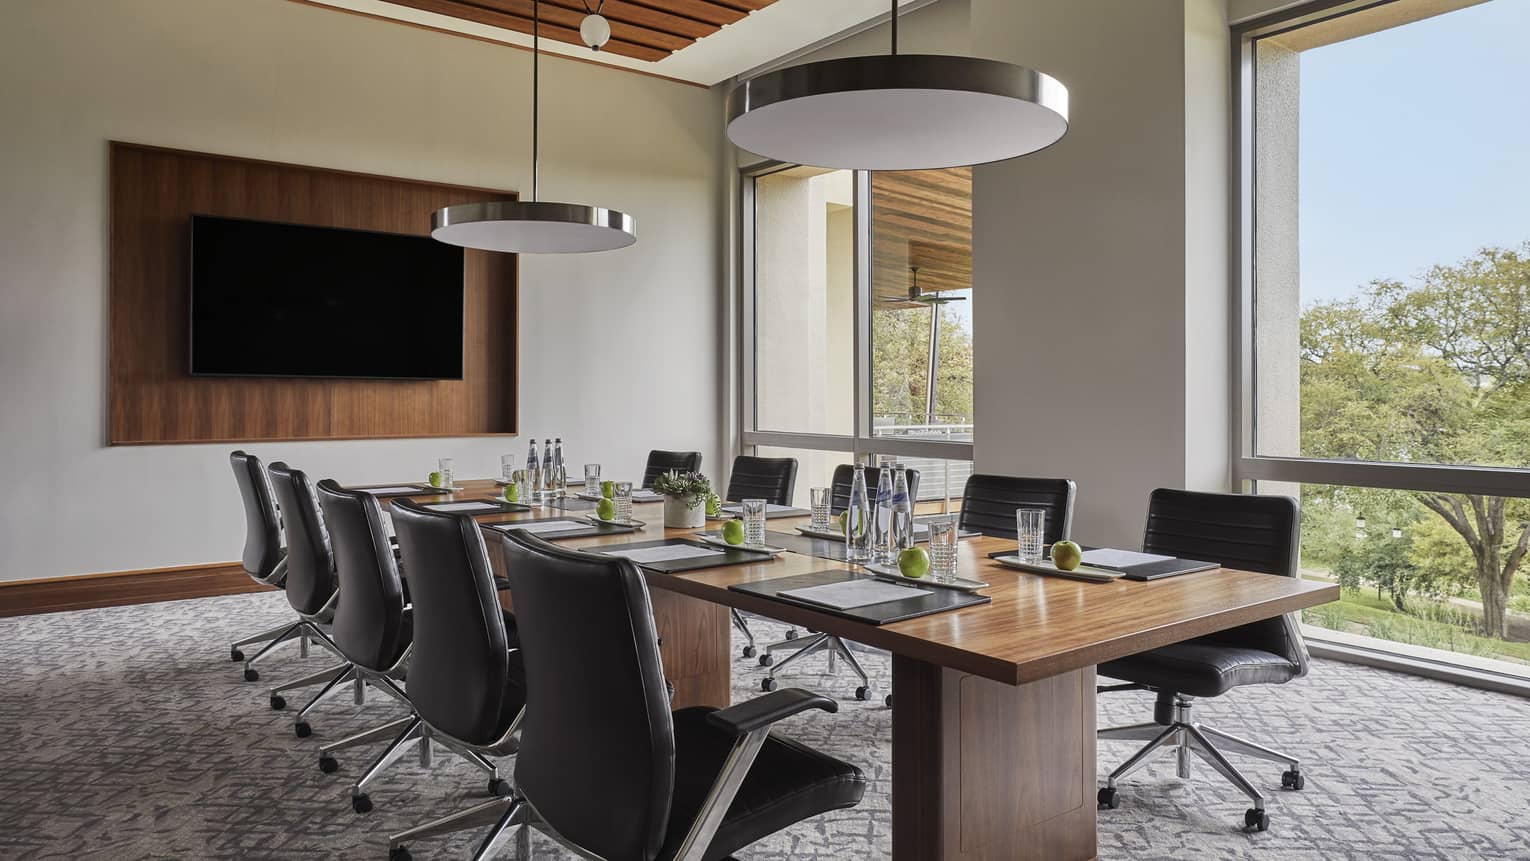 Leather swivel chairs around wood boardroom table in bright Waller Creek room